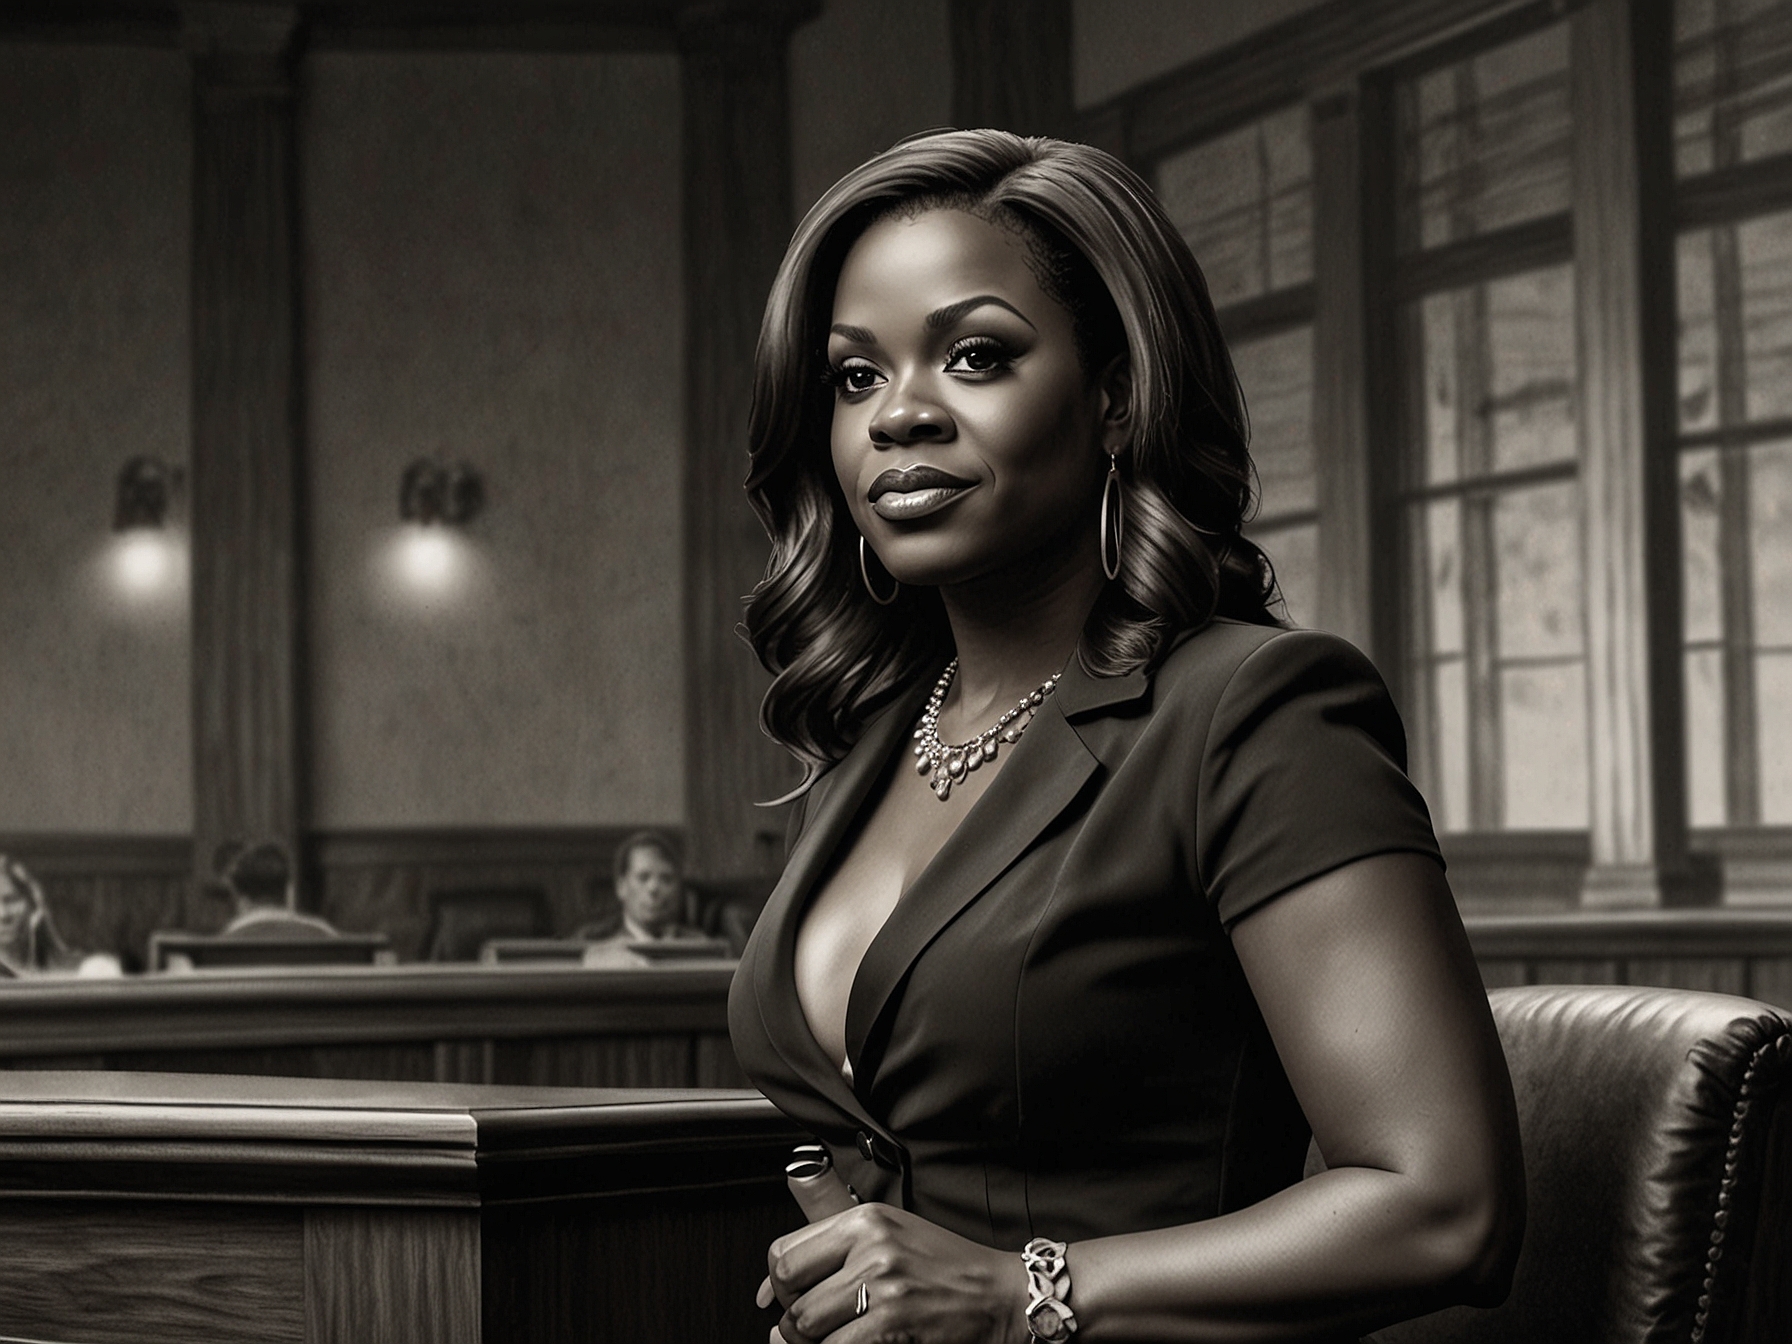 Kandi Burruss on the set of 'Reasonable Doubt', showcasing her transition from reality TV to acting in a dramatic courtroom scene. Burruss exudes confidence as she brings her character to life.